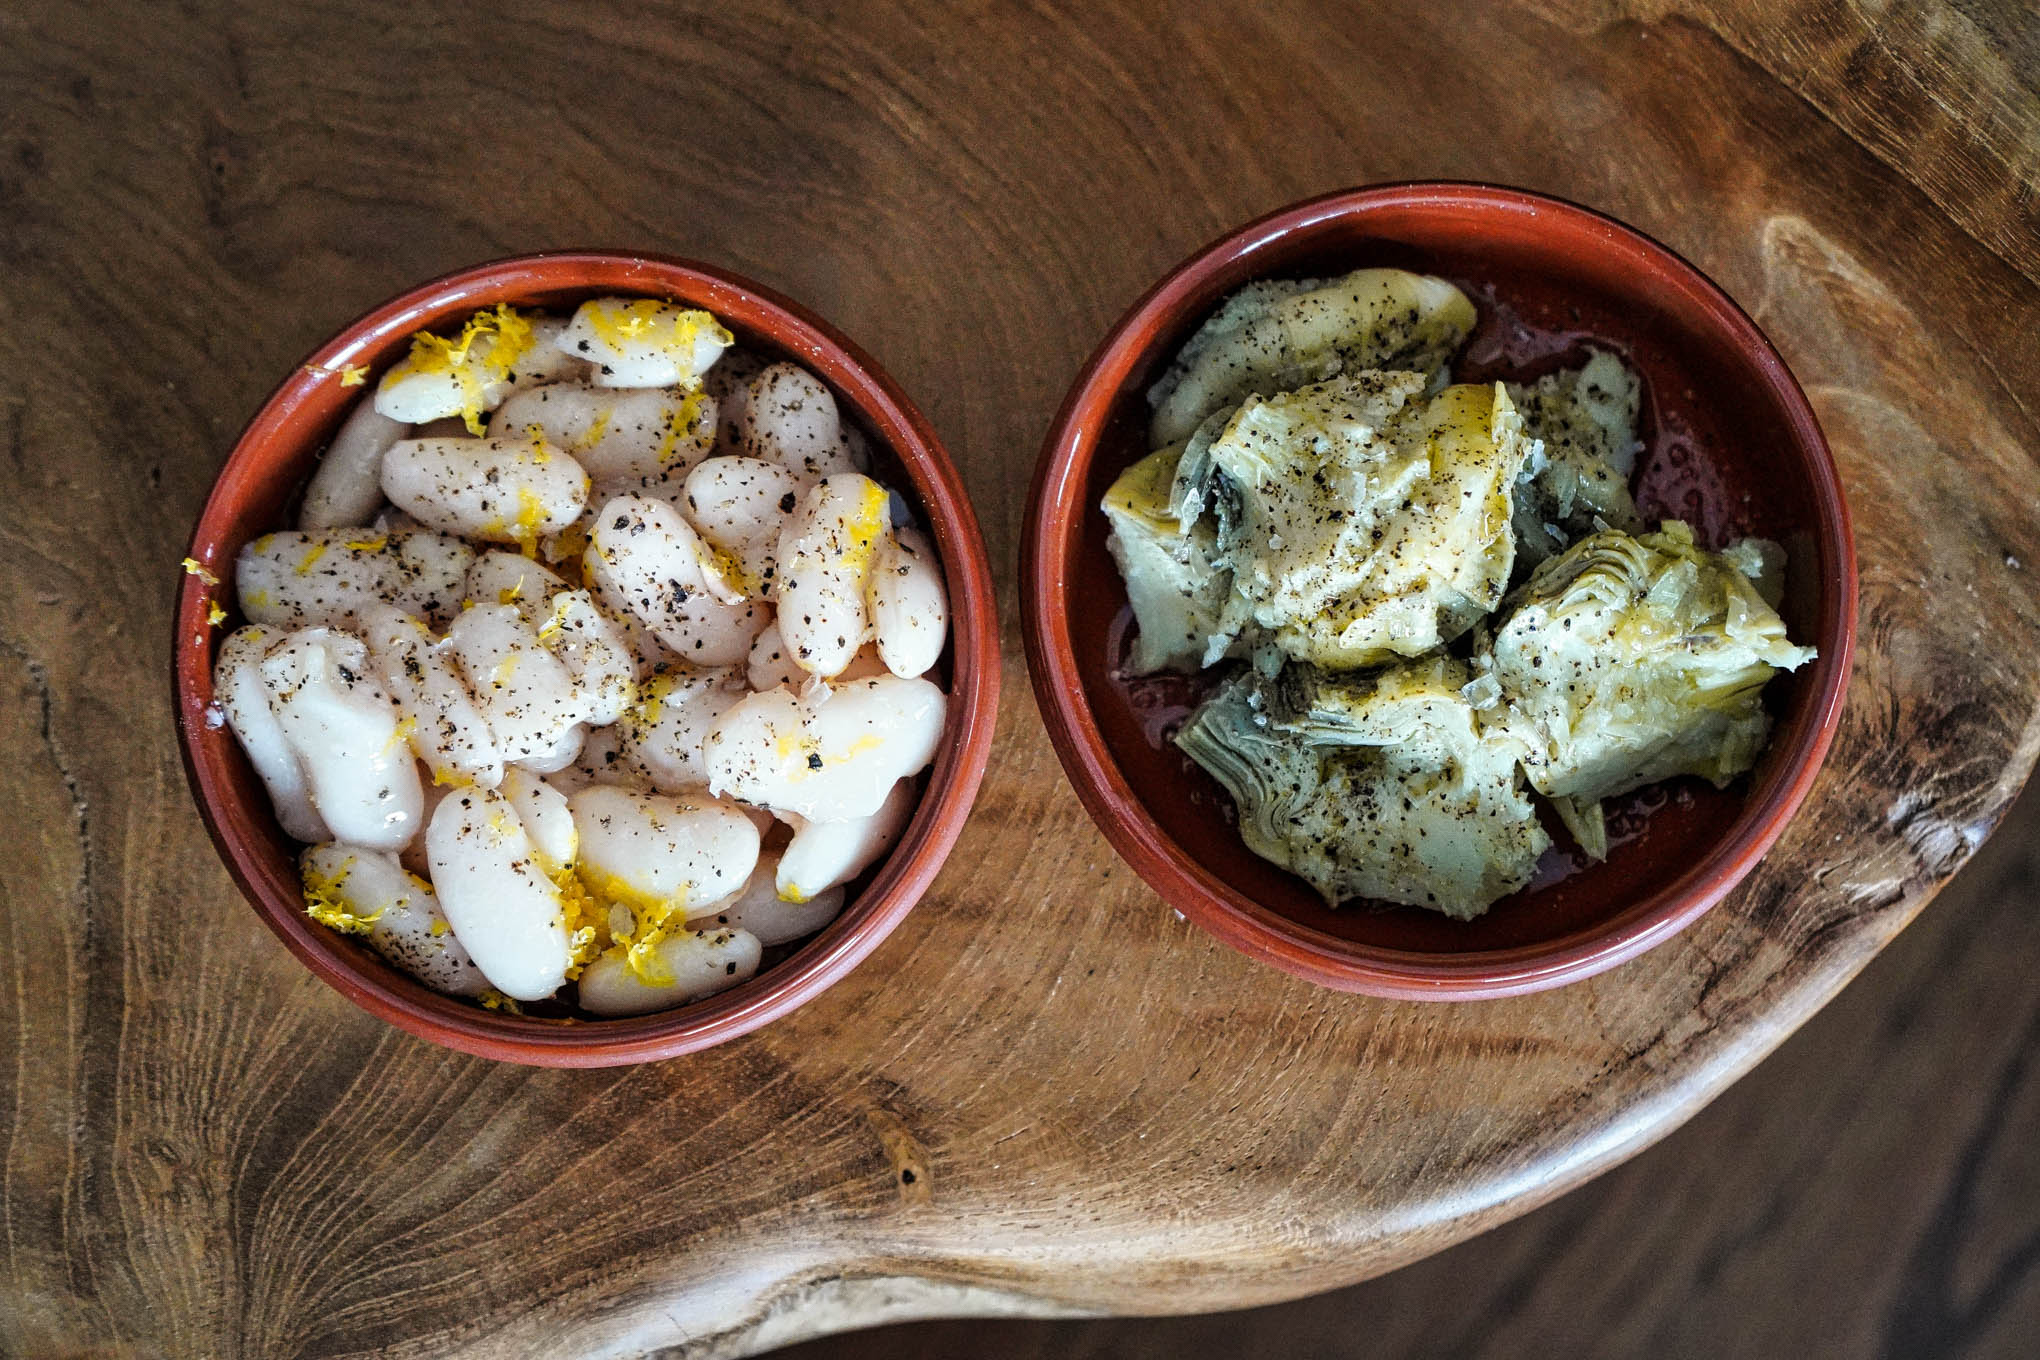 white fava beans with lemon zest in cazuela and artichoke hearts with olive oil in cazuela